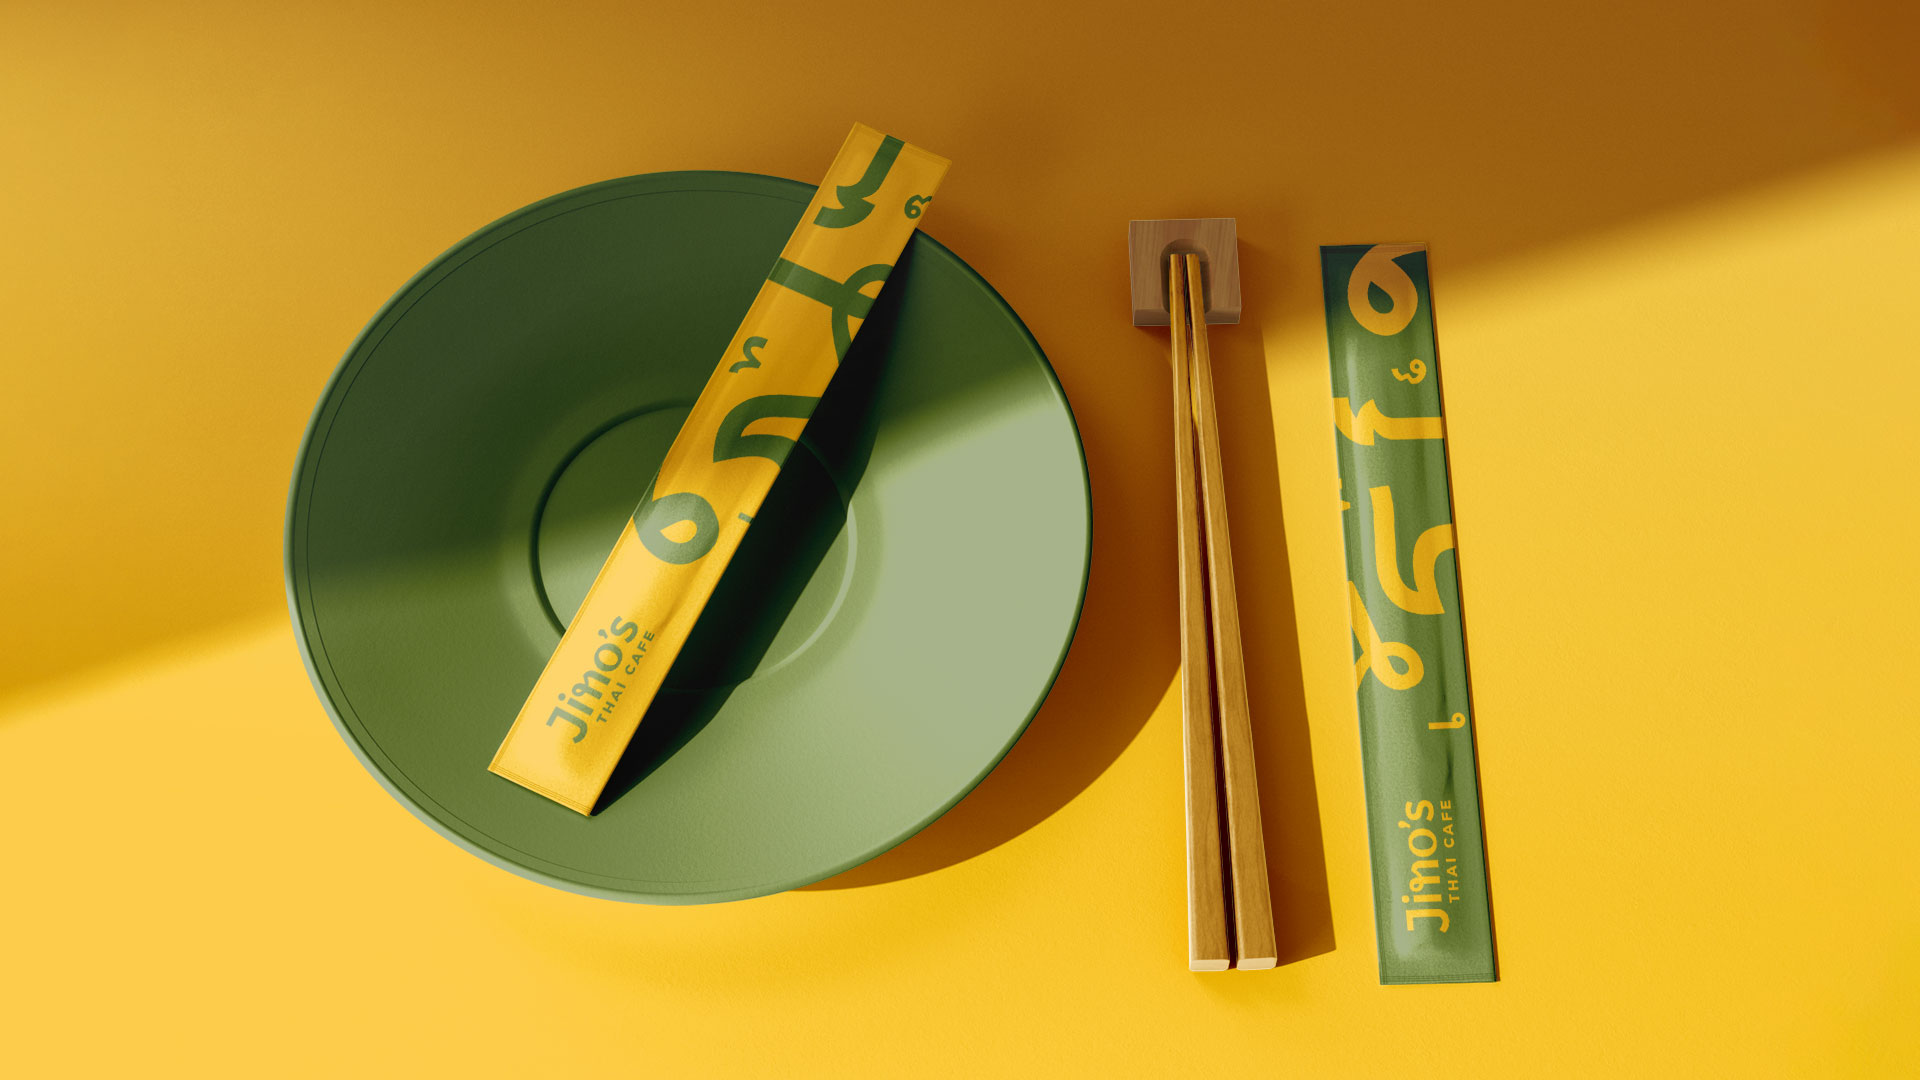 Scene with the two main colours of Jino's thai cafe with branded chop sticks and packaging